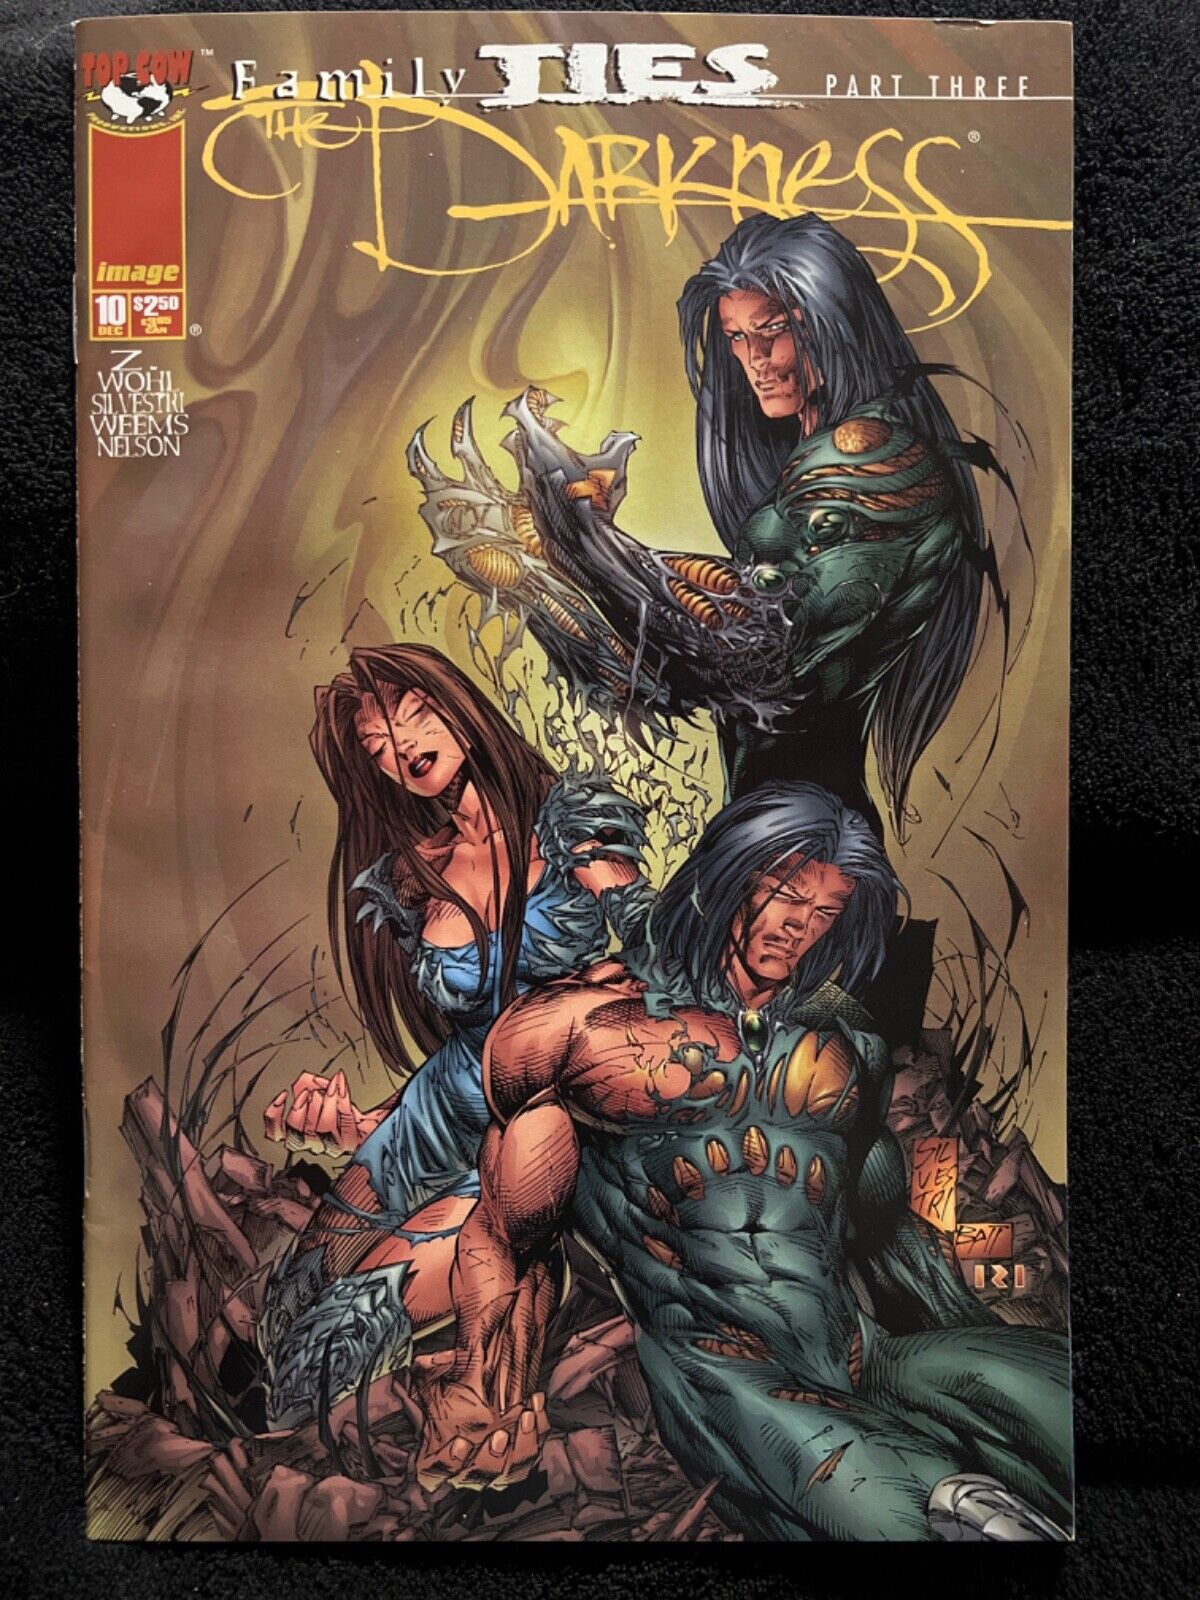 Cb7~comic book- The Darkness: Family Ties Part 3 - issue 10 - 1997